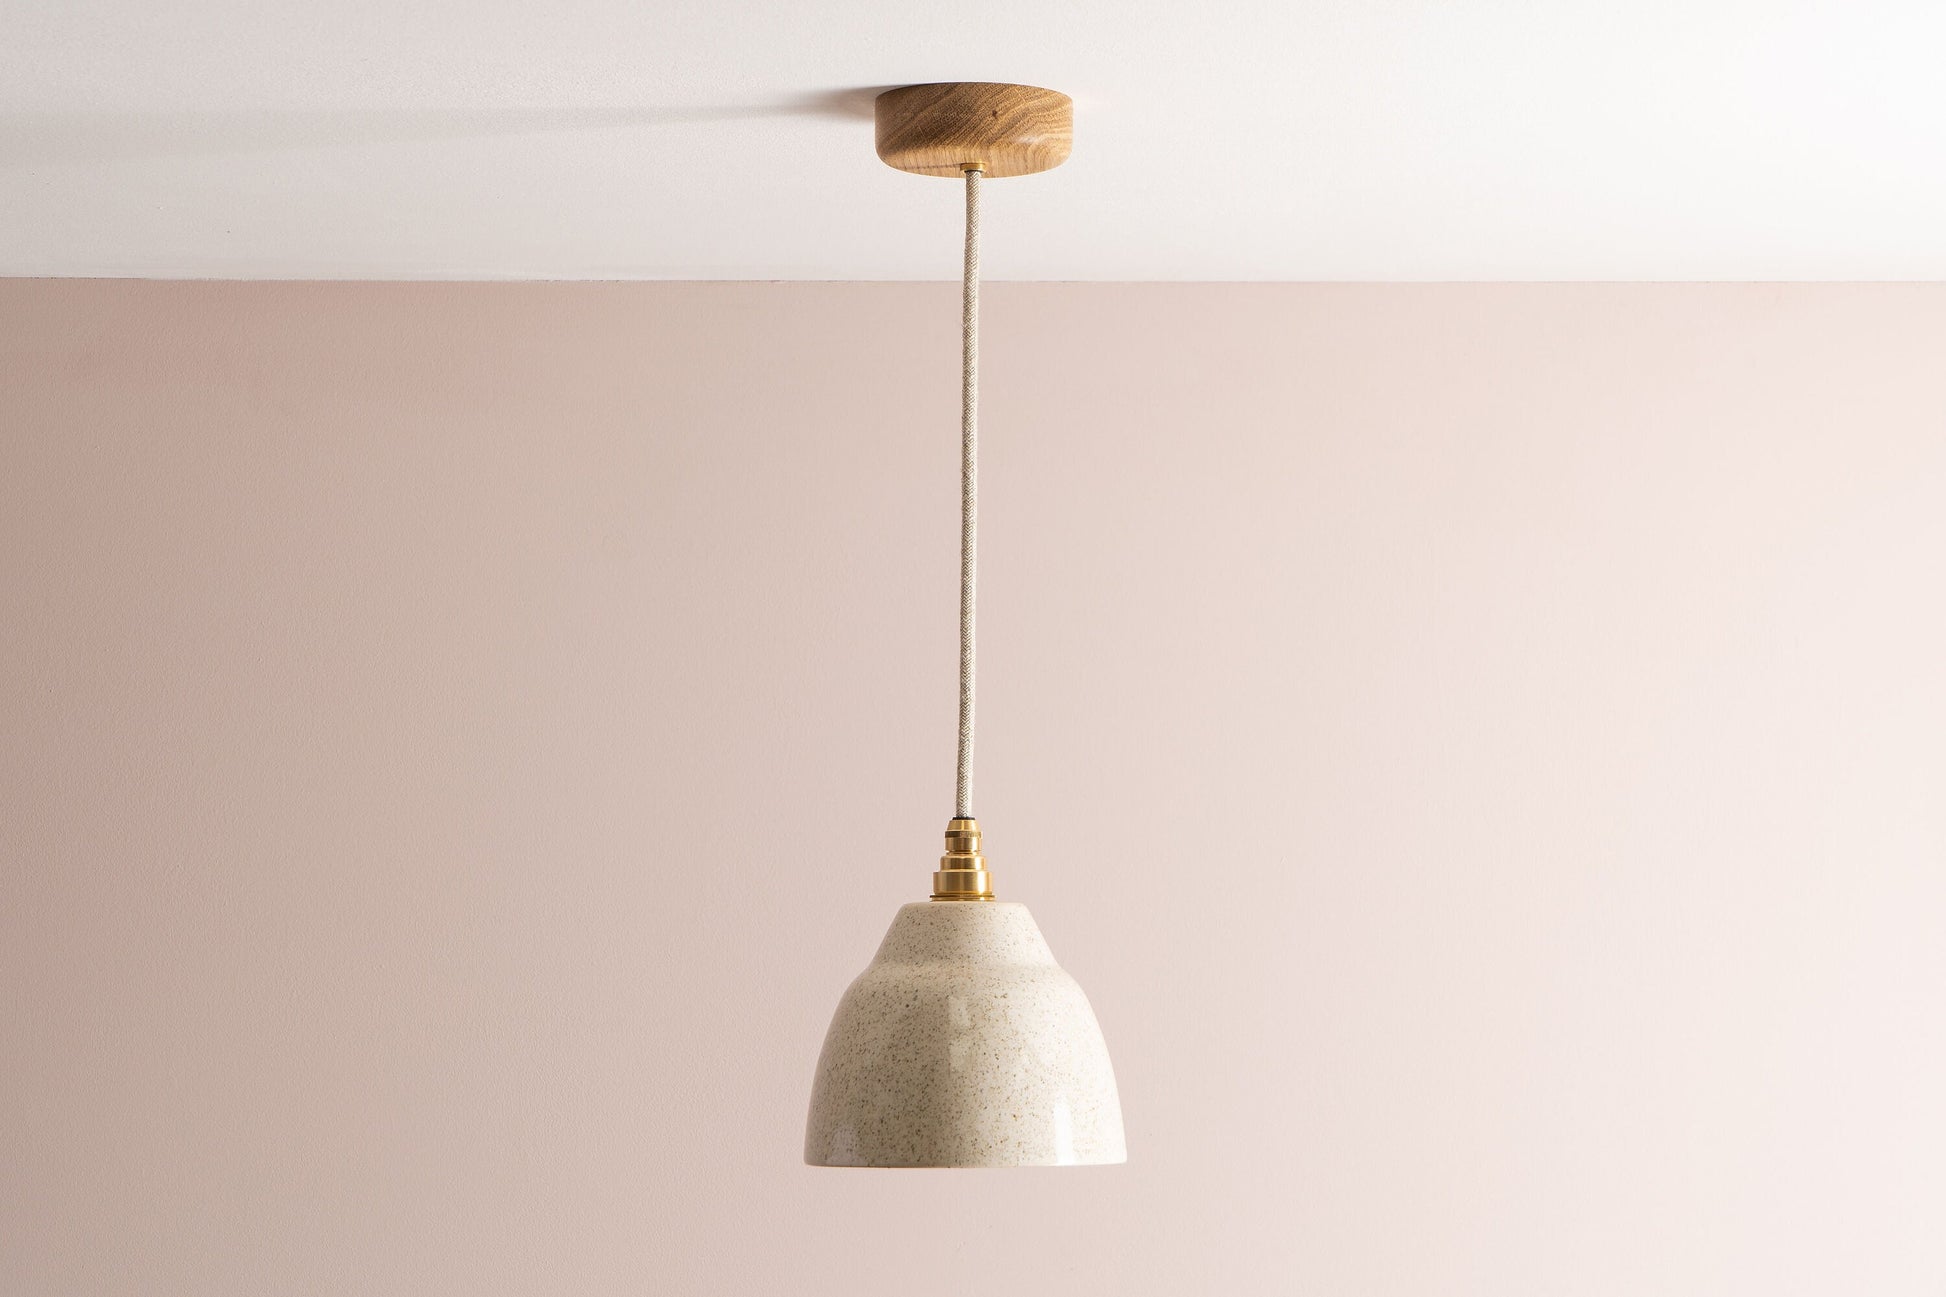 Small Speckled Cream Gloss Element Pendant Light in Ceramic and Brass/Nickel by StudioHaran